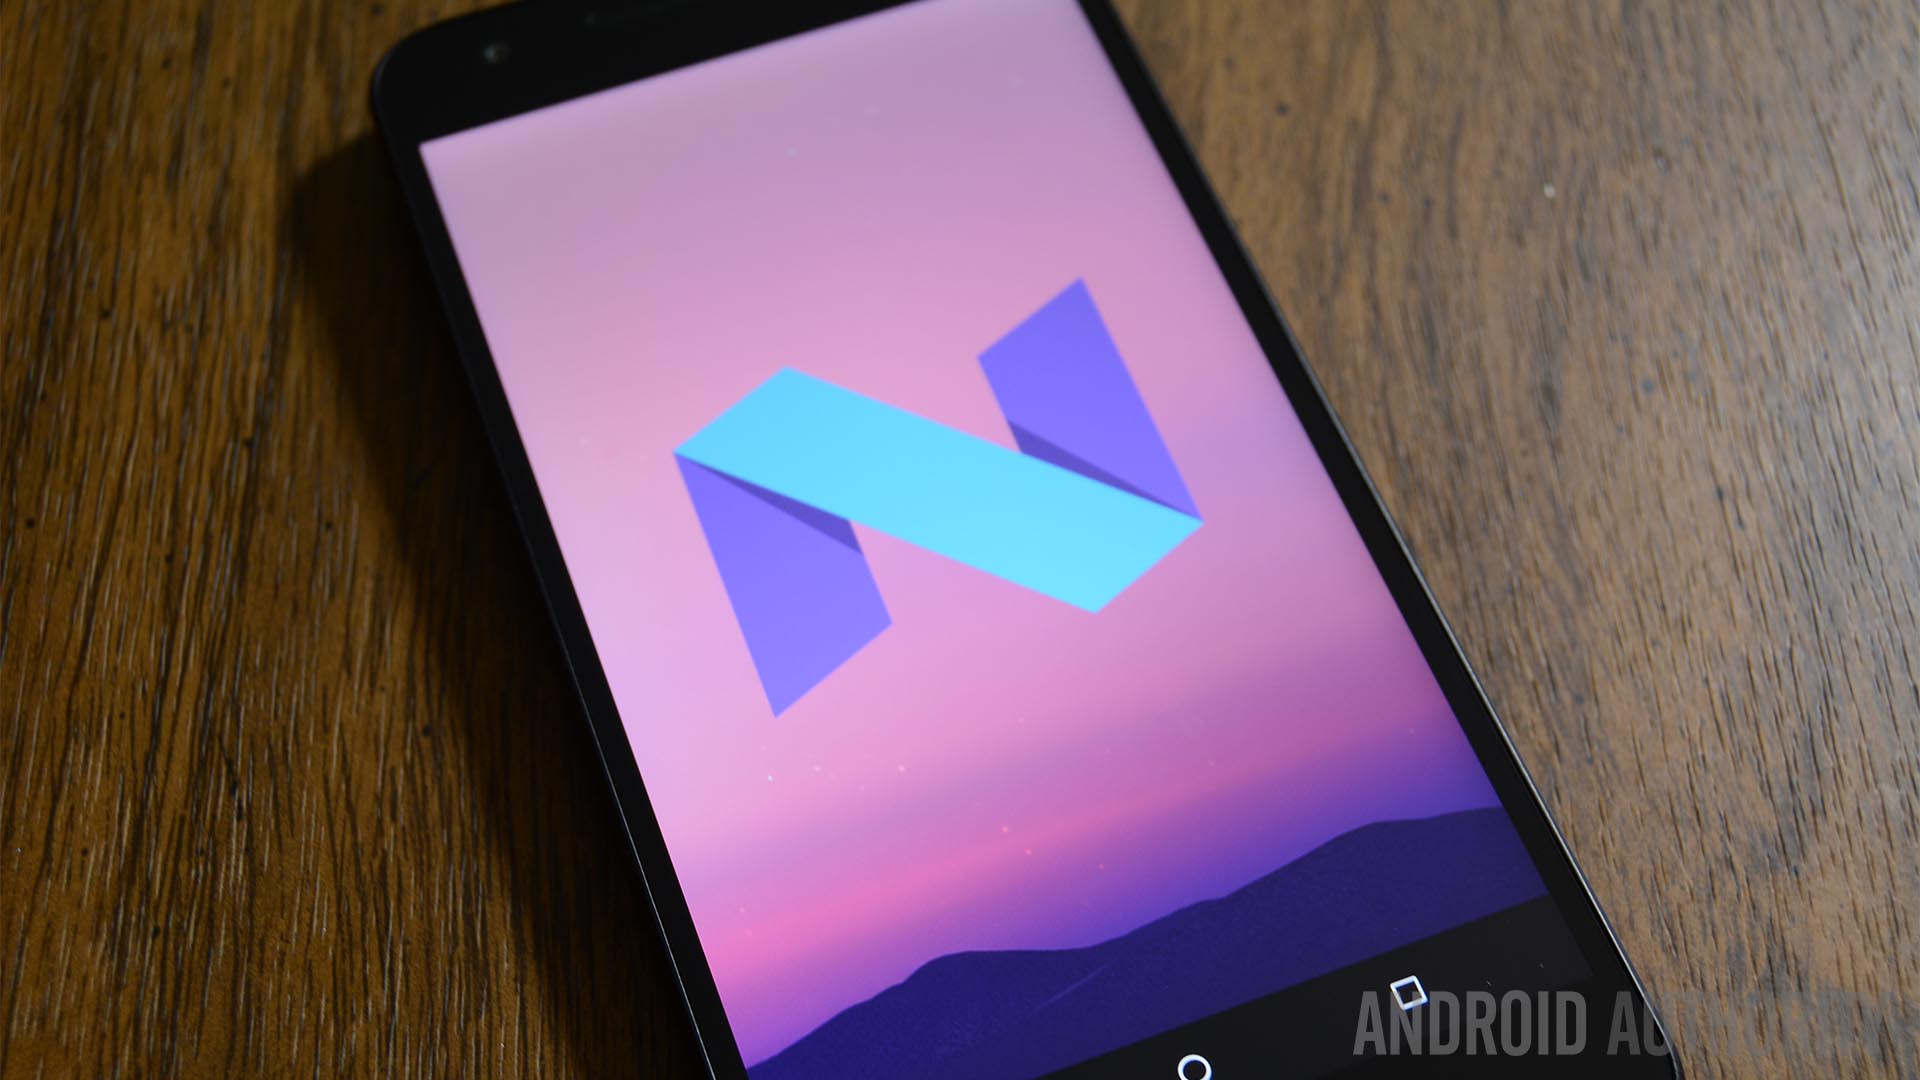 Android N easter egg 2